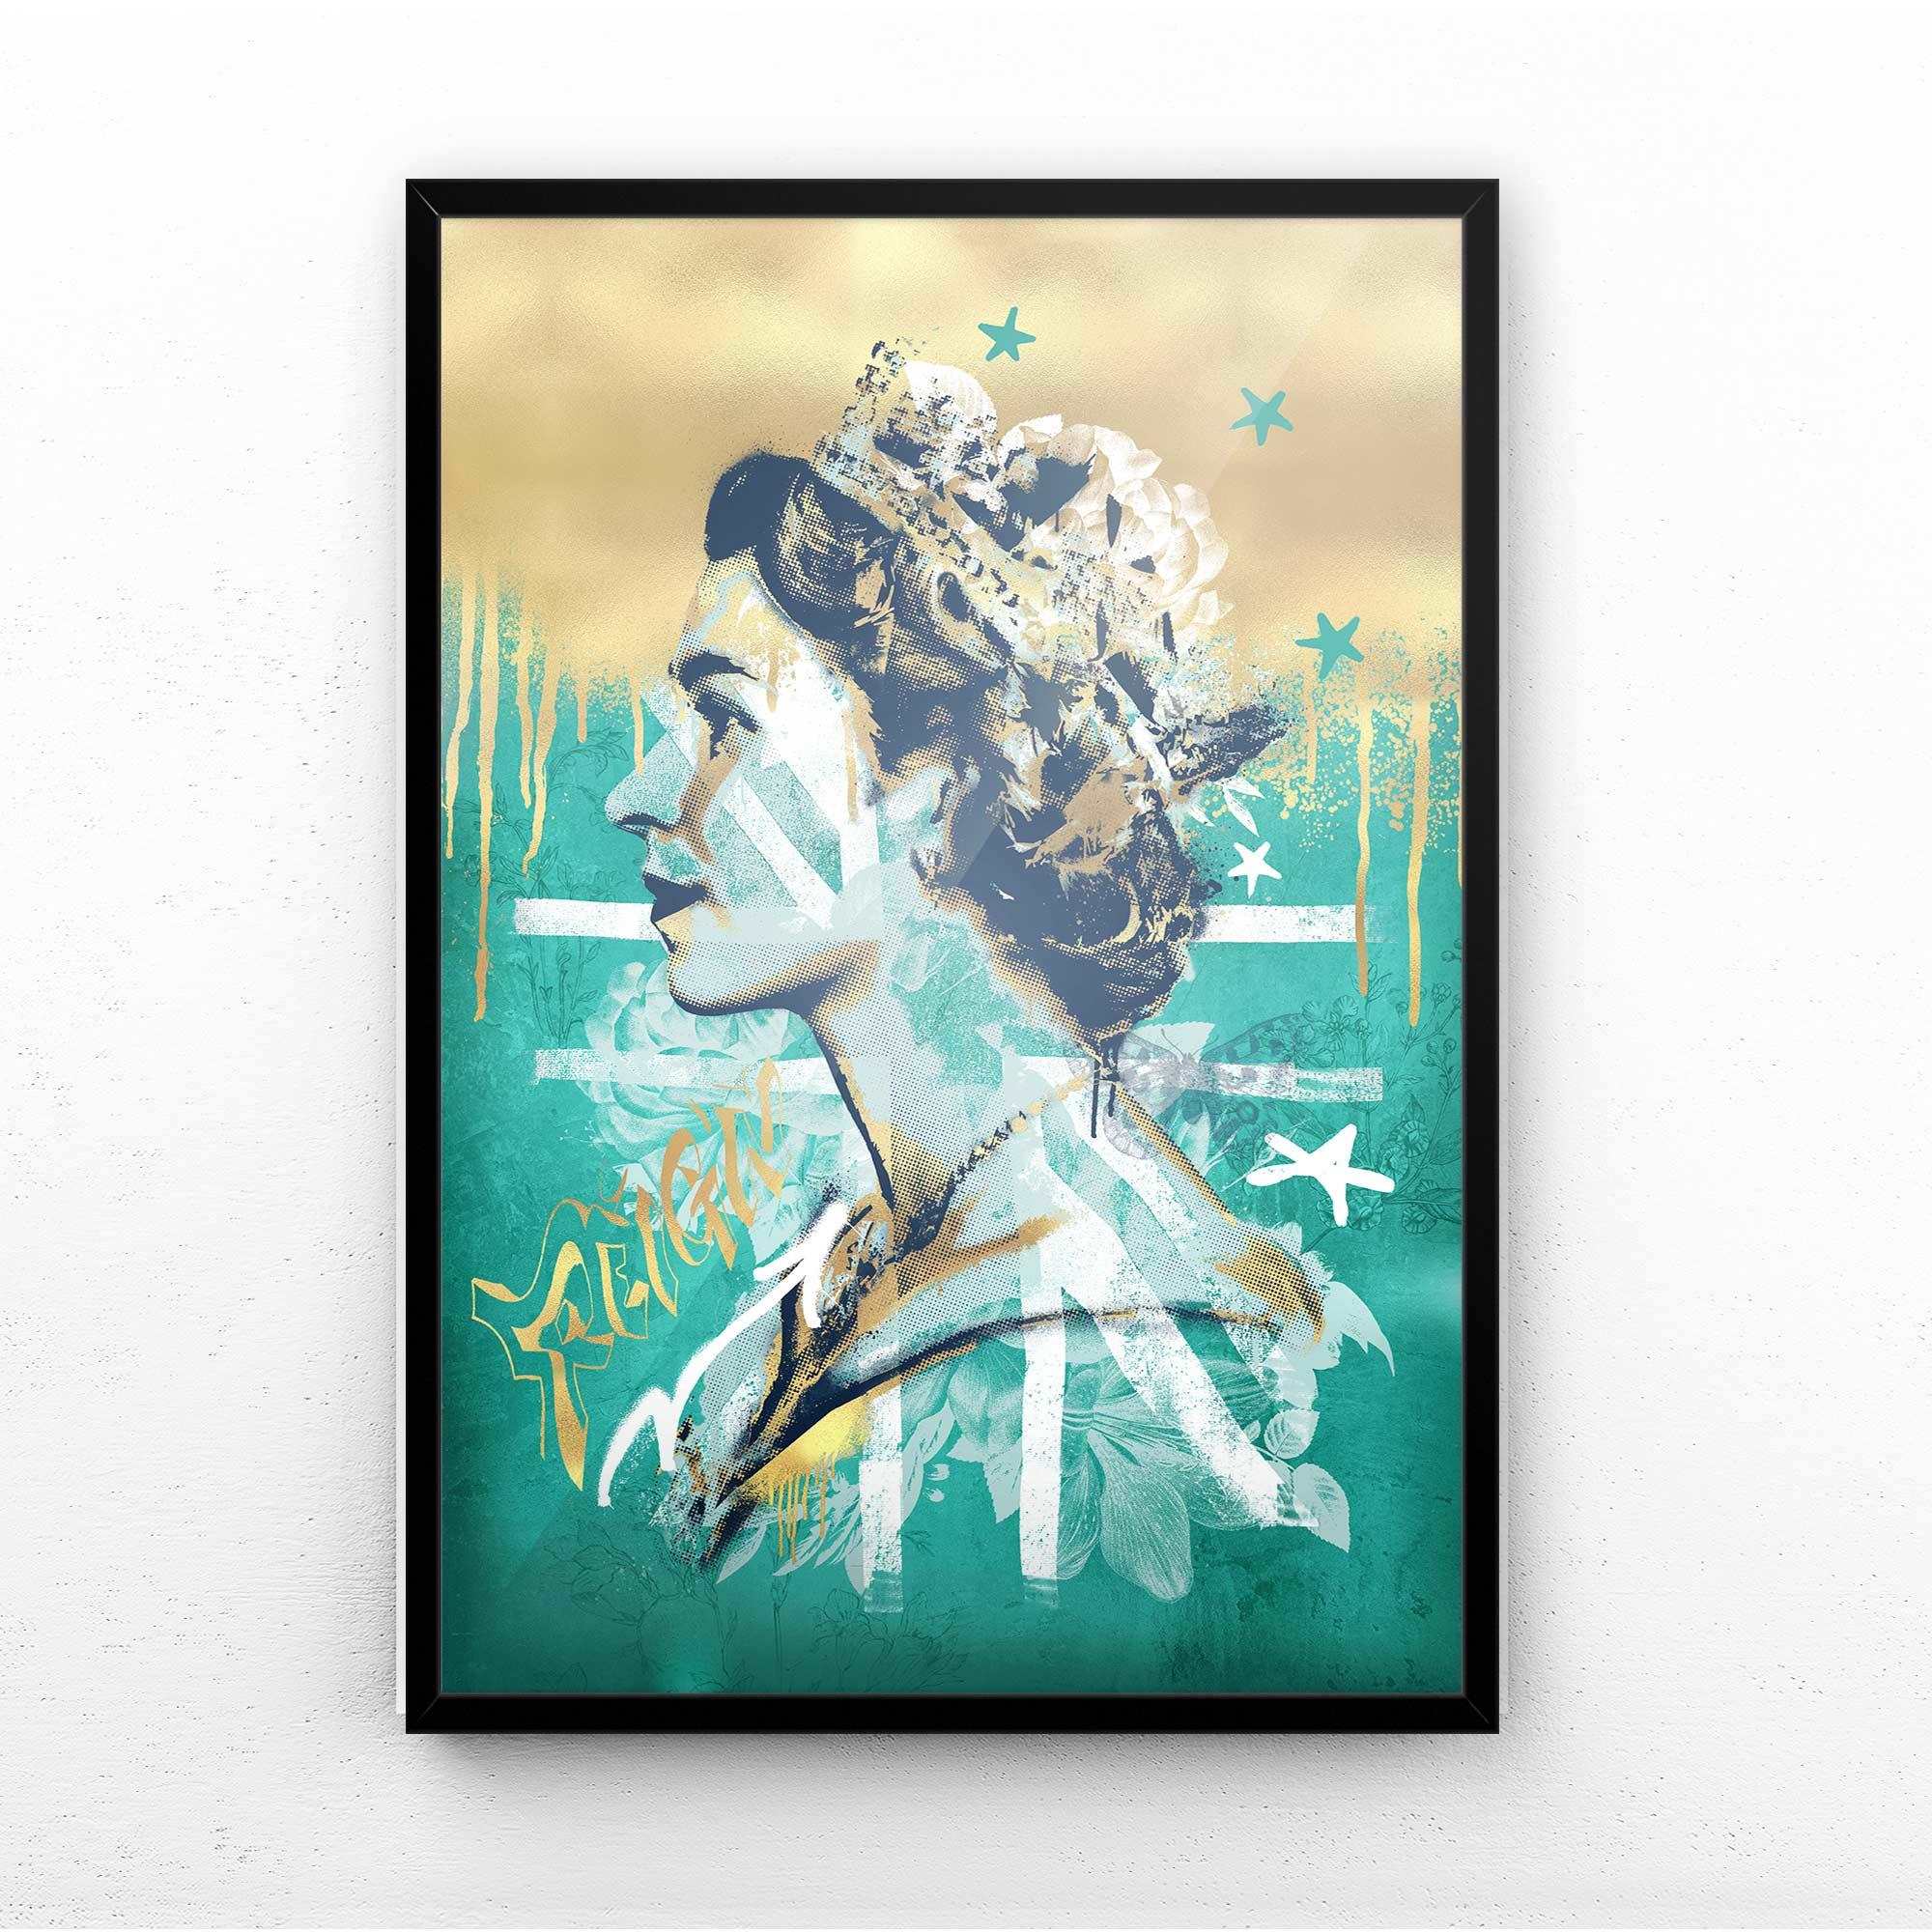 REIGN OVER ME TEAL / GOLD PRINT - Afterhours Gallery 